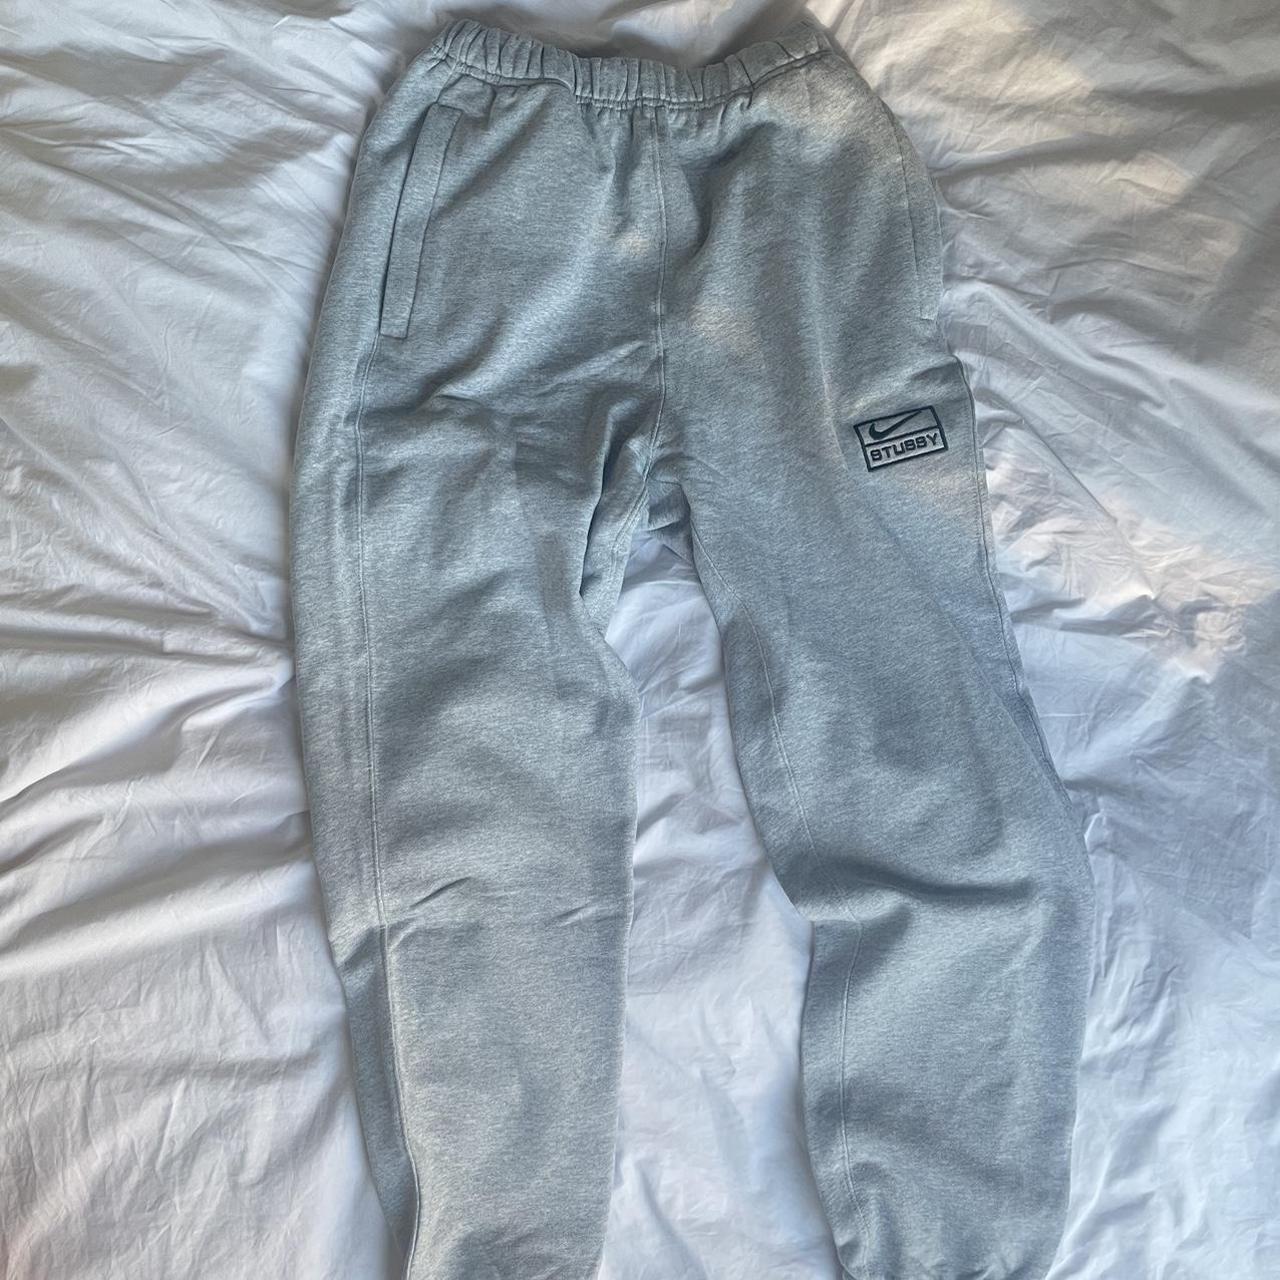 Stussy Nike Grey Joggers Medium. Got Given these as... - Depop